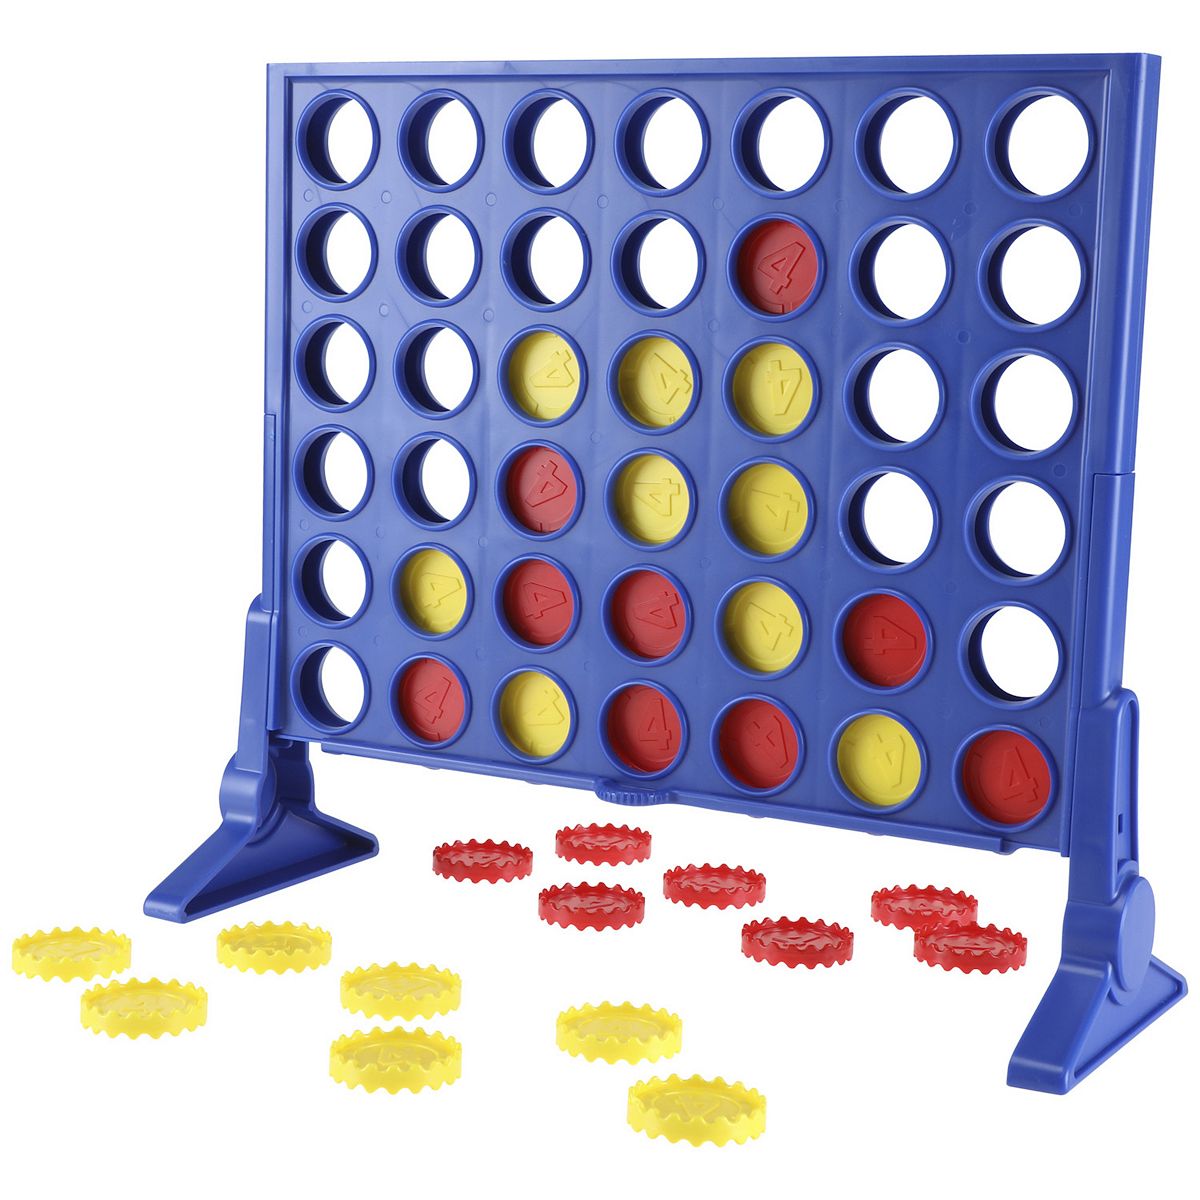 Connect 4 container